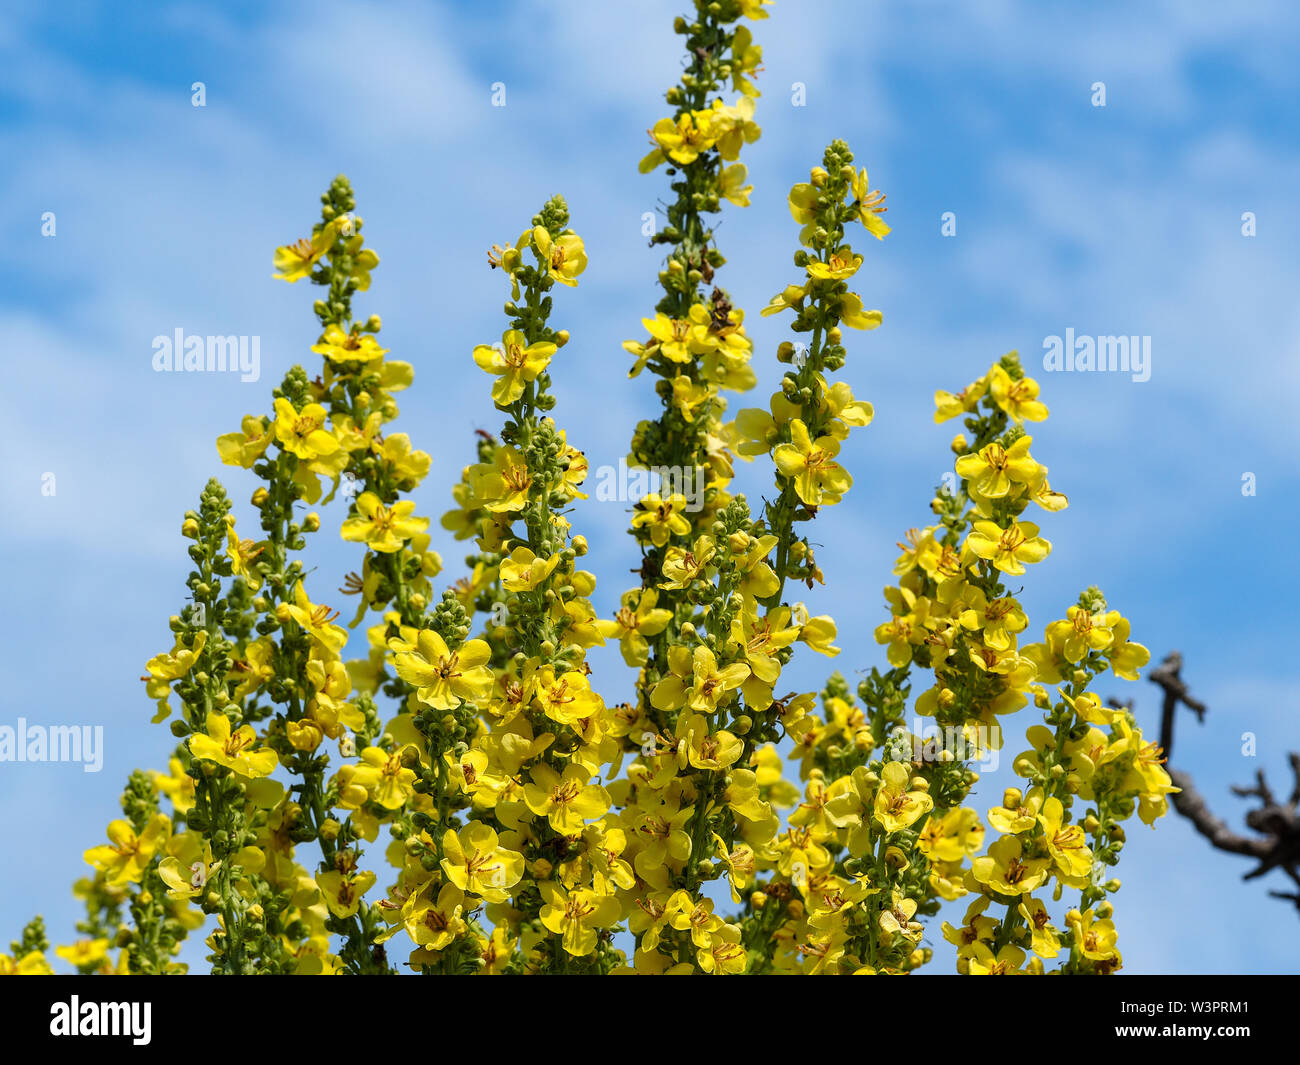 Tall yellow flower spikes of a Verbascum olympicum (Olympian mullein) plant with a blue sky background Stock Photo